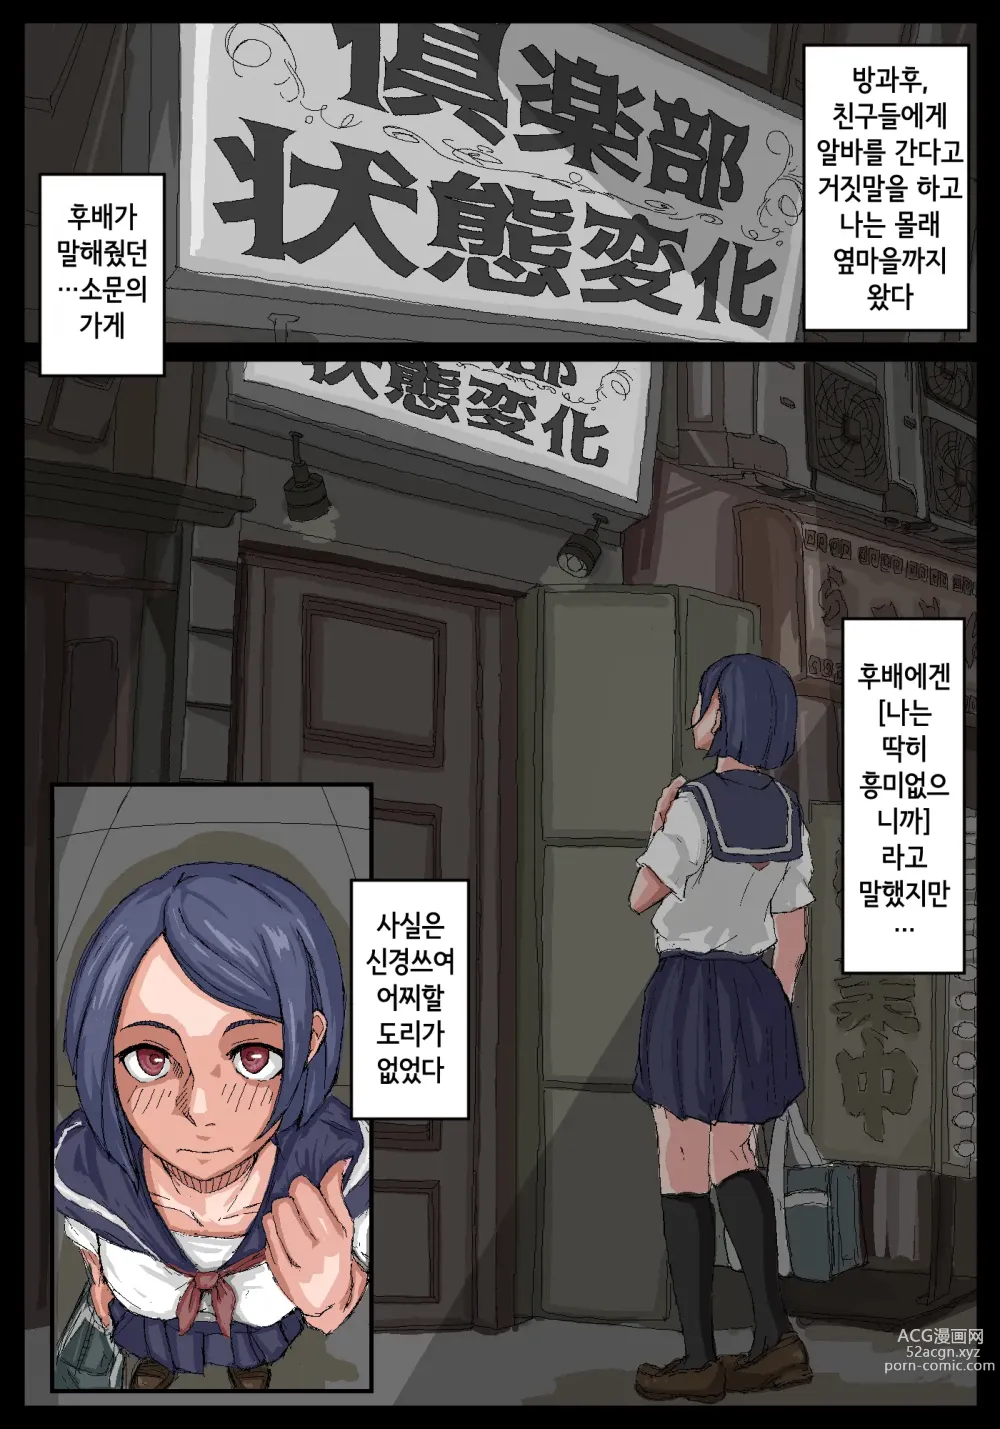 Page 2 of doujinshi 오나홀 선배